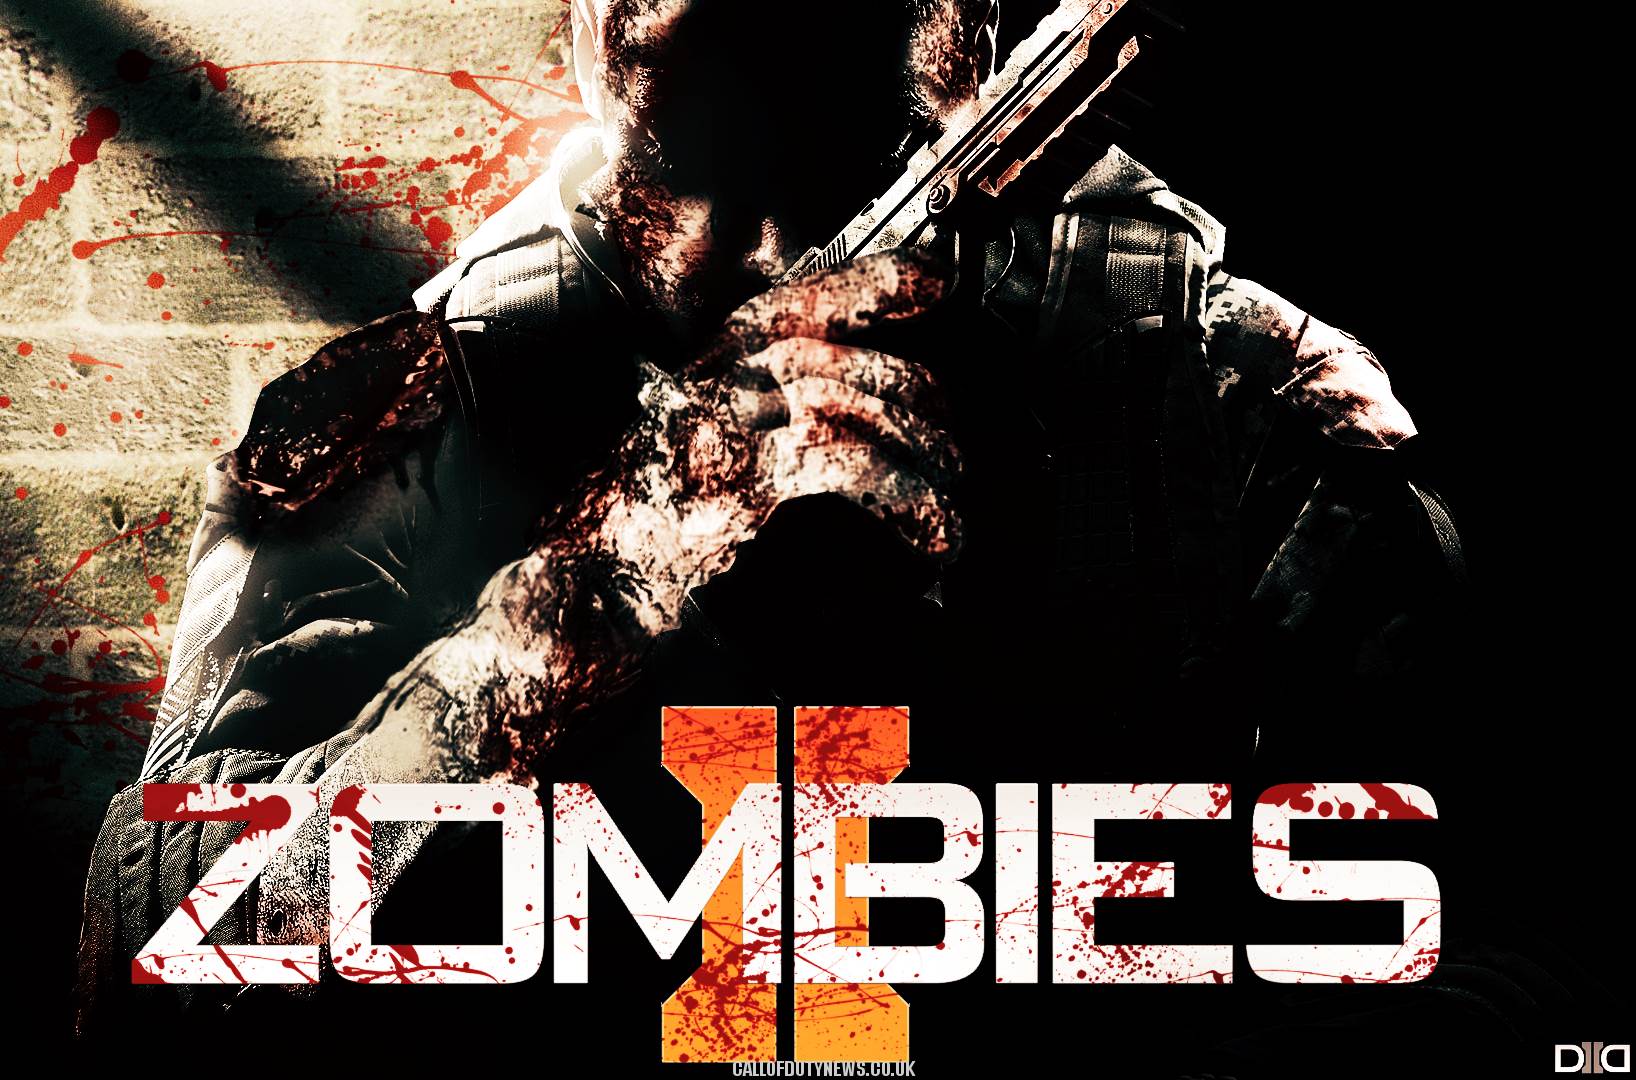 call of duty zombies download free pc